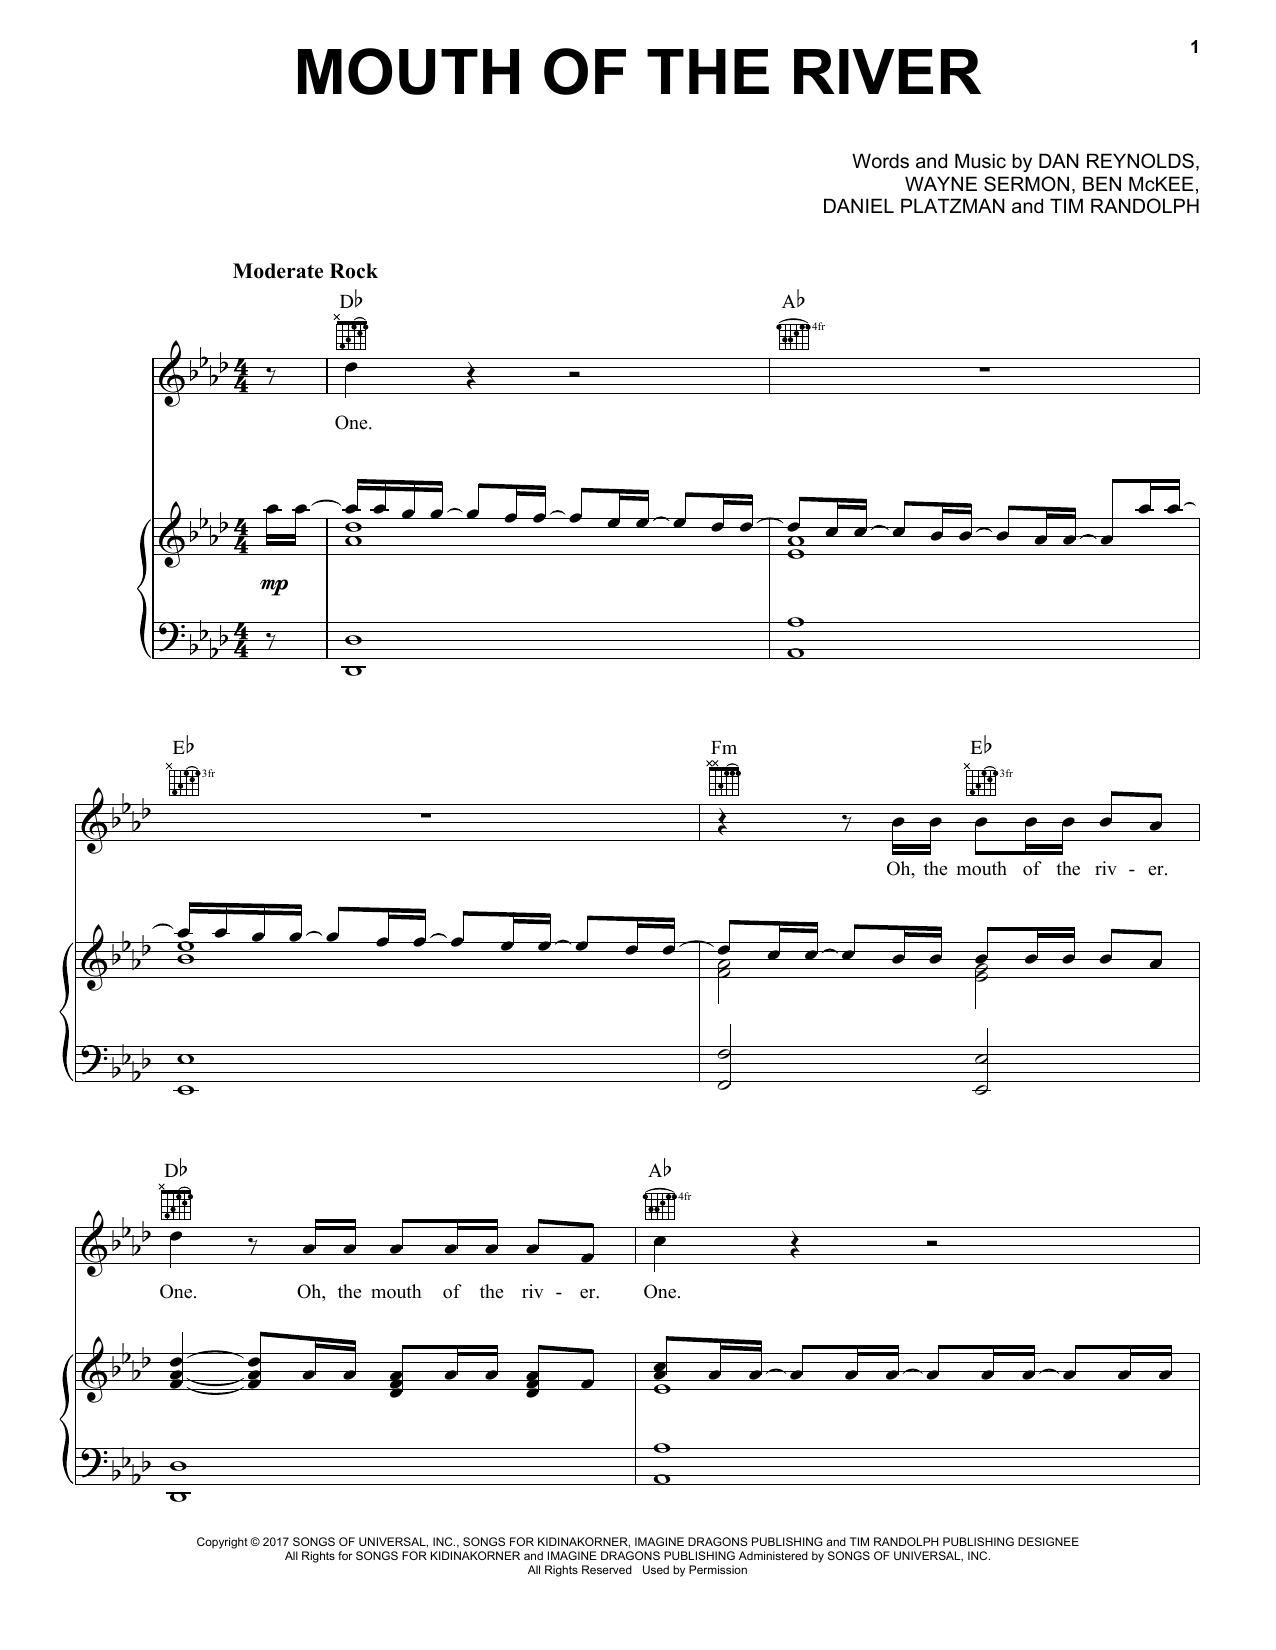 Download Imagine Dragons Mouth Of The River Sheet Music